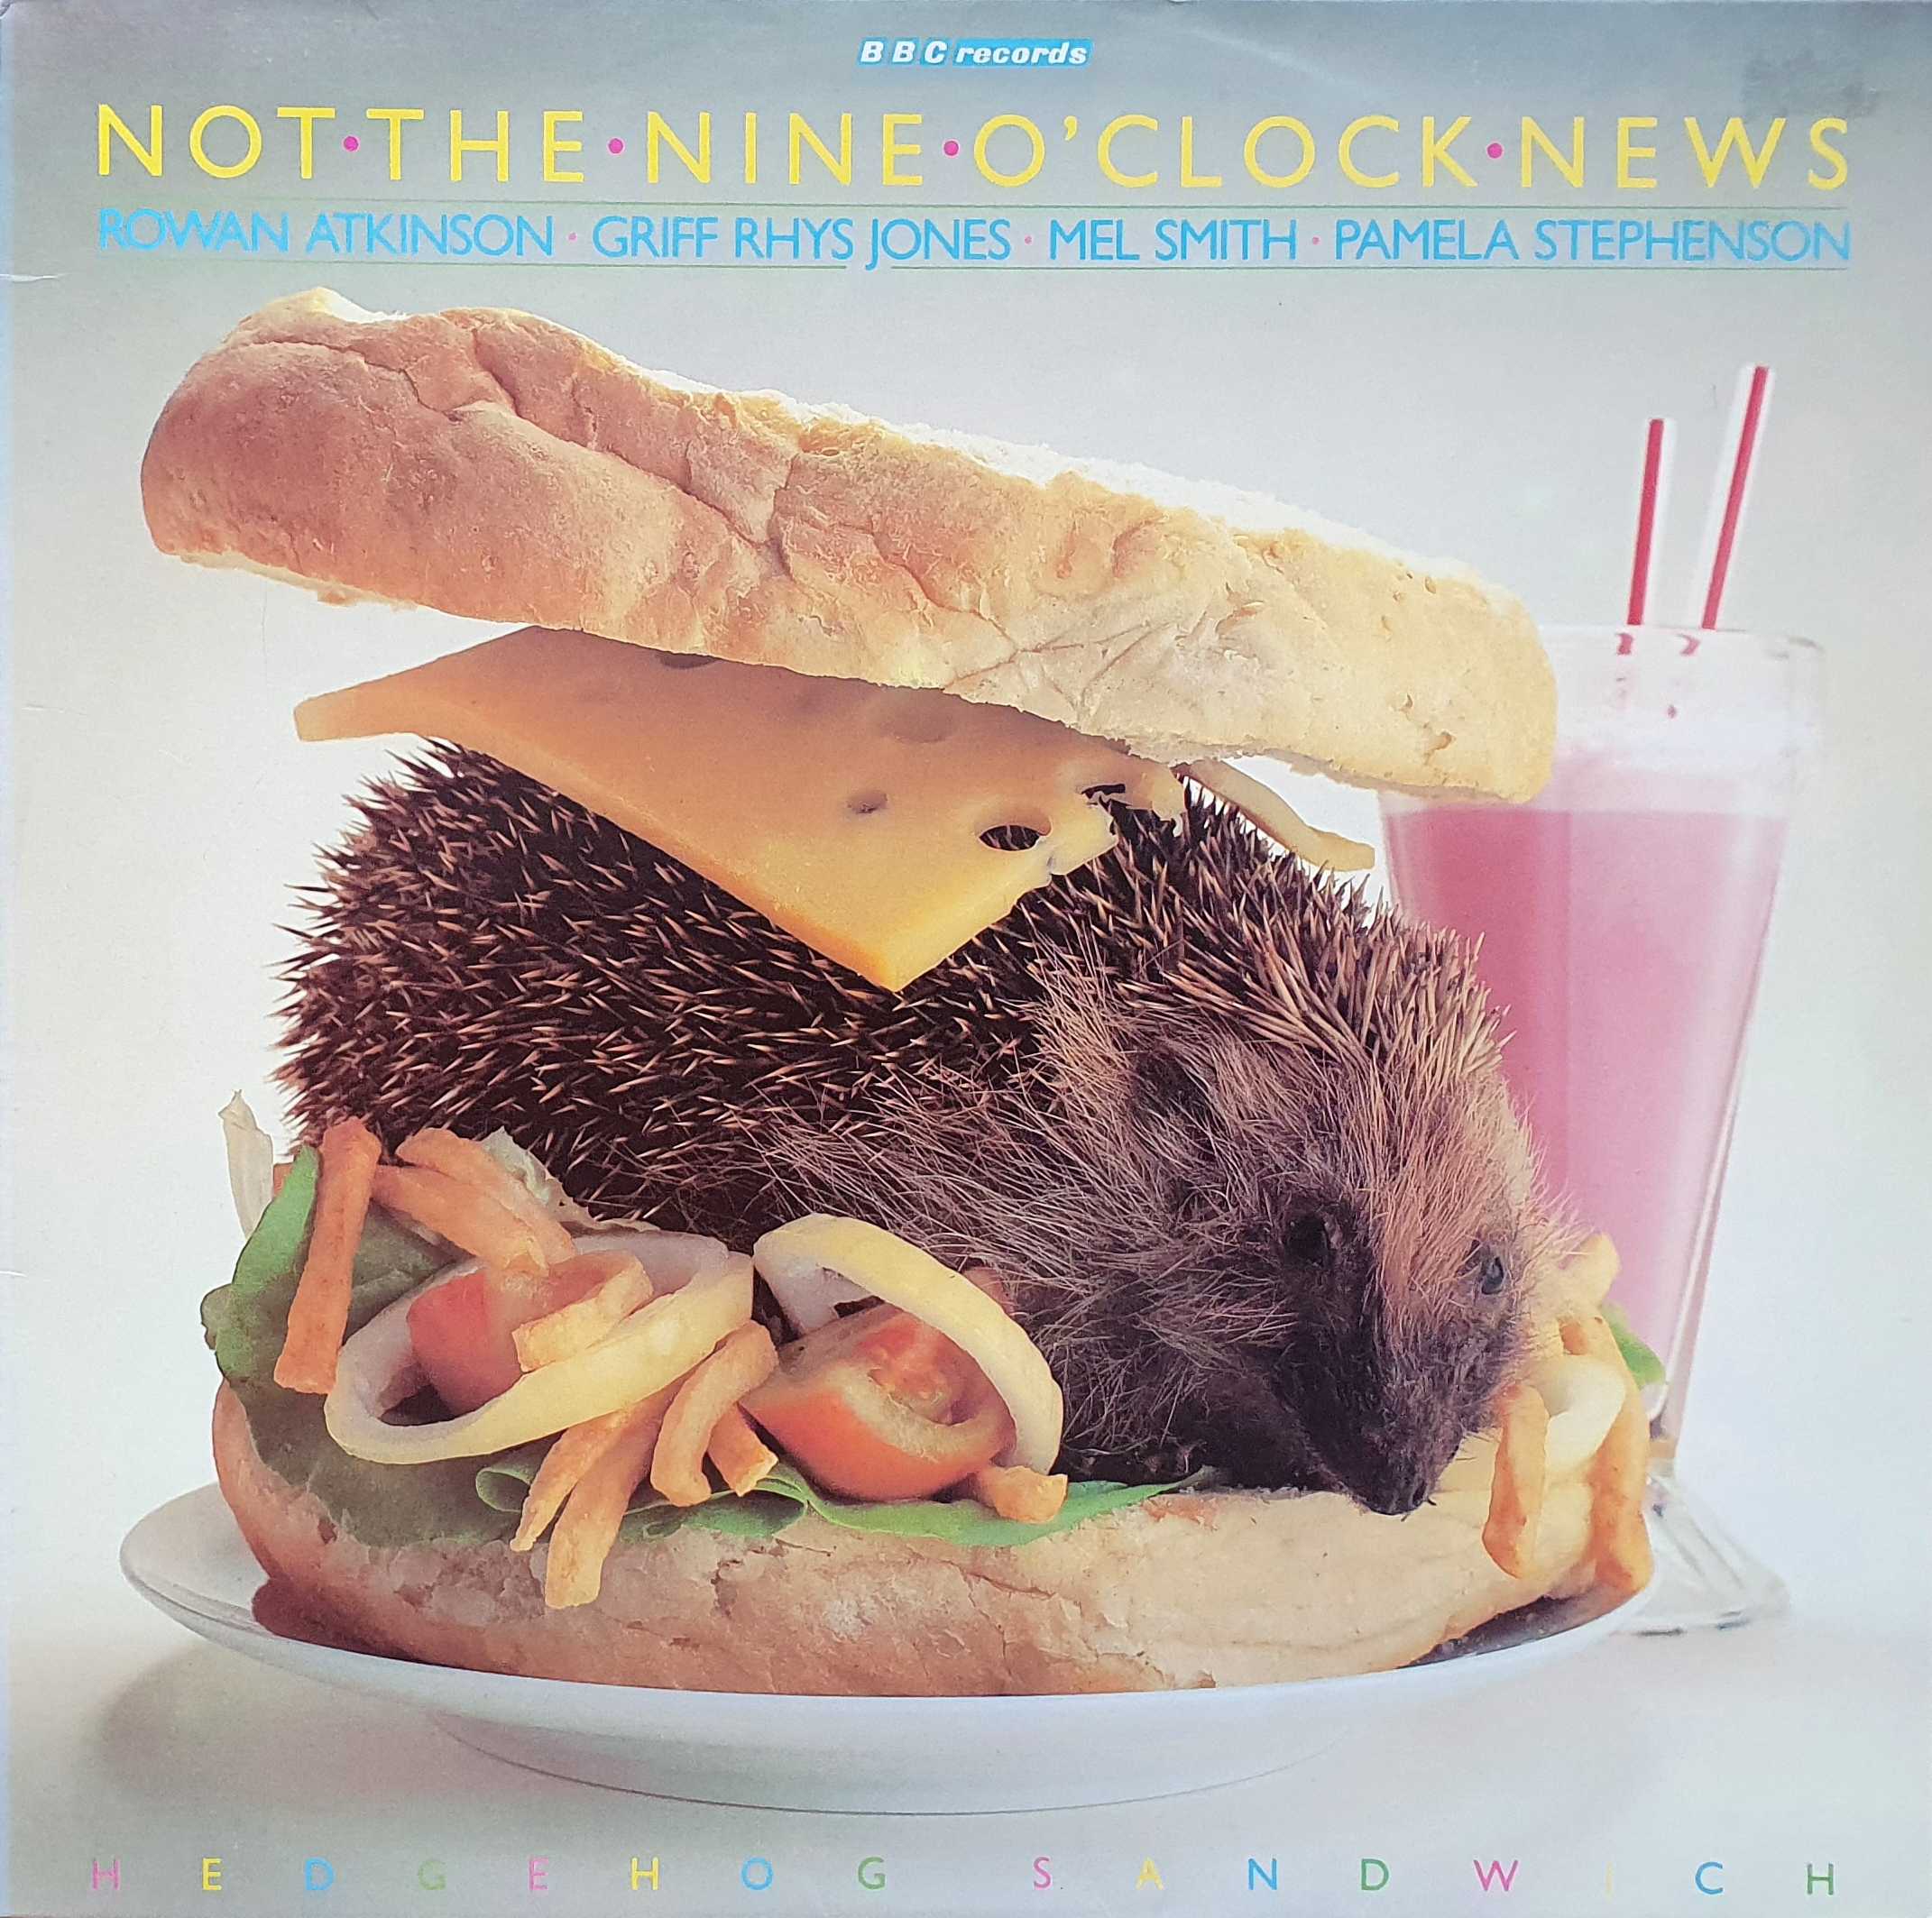 Picture of 2964 064 Hedgehog sandwich (Australian import) by artist Not the nine o'clock news from the BBC albums - Records and Tapes library